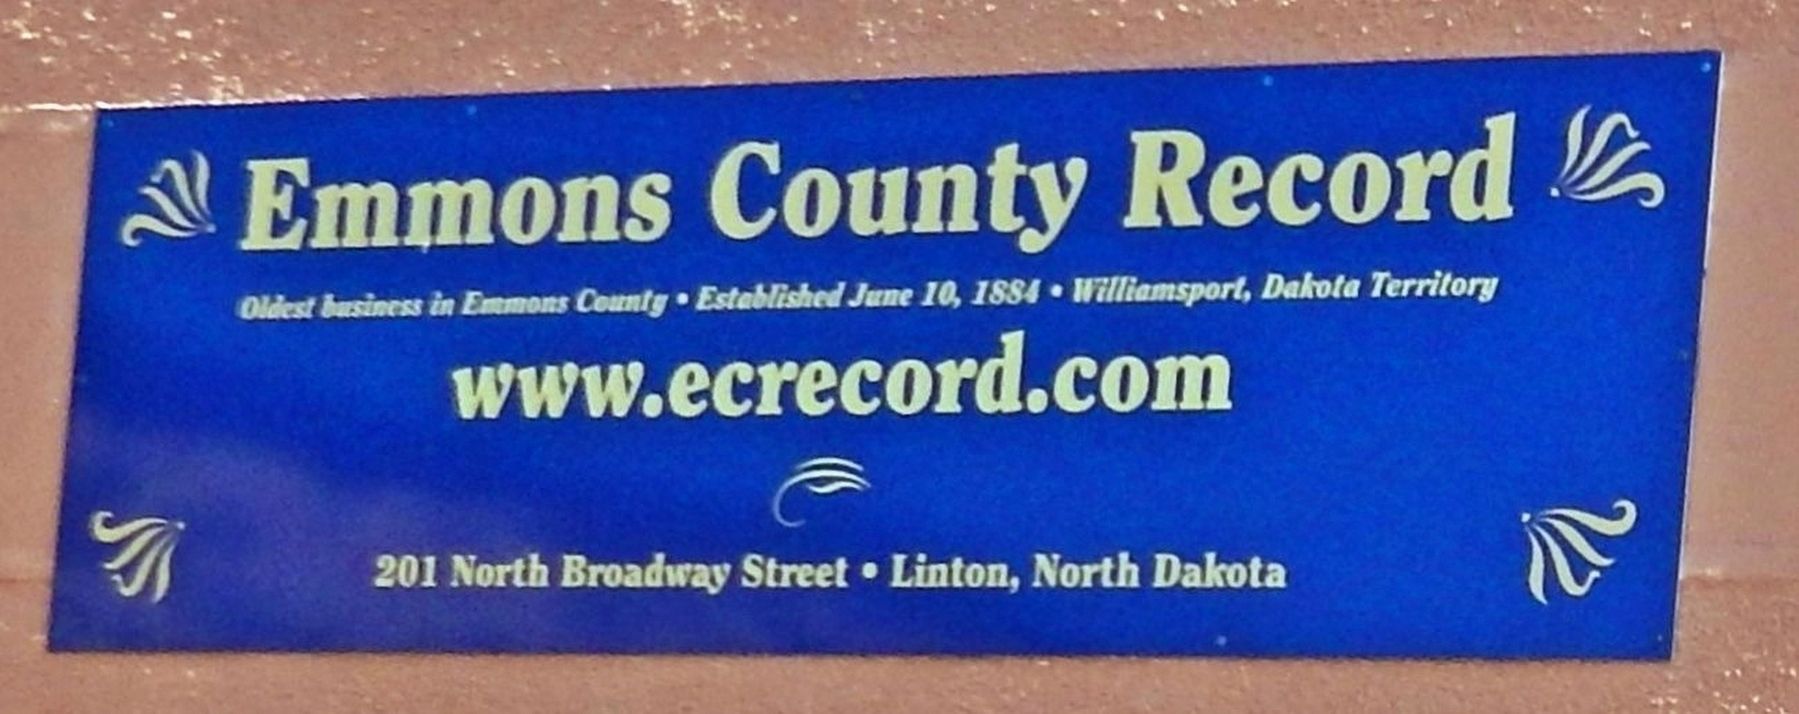 Emmons County Record Marker (<i>above the front entrance</i>) image. Click for full size.